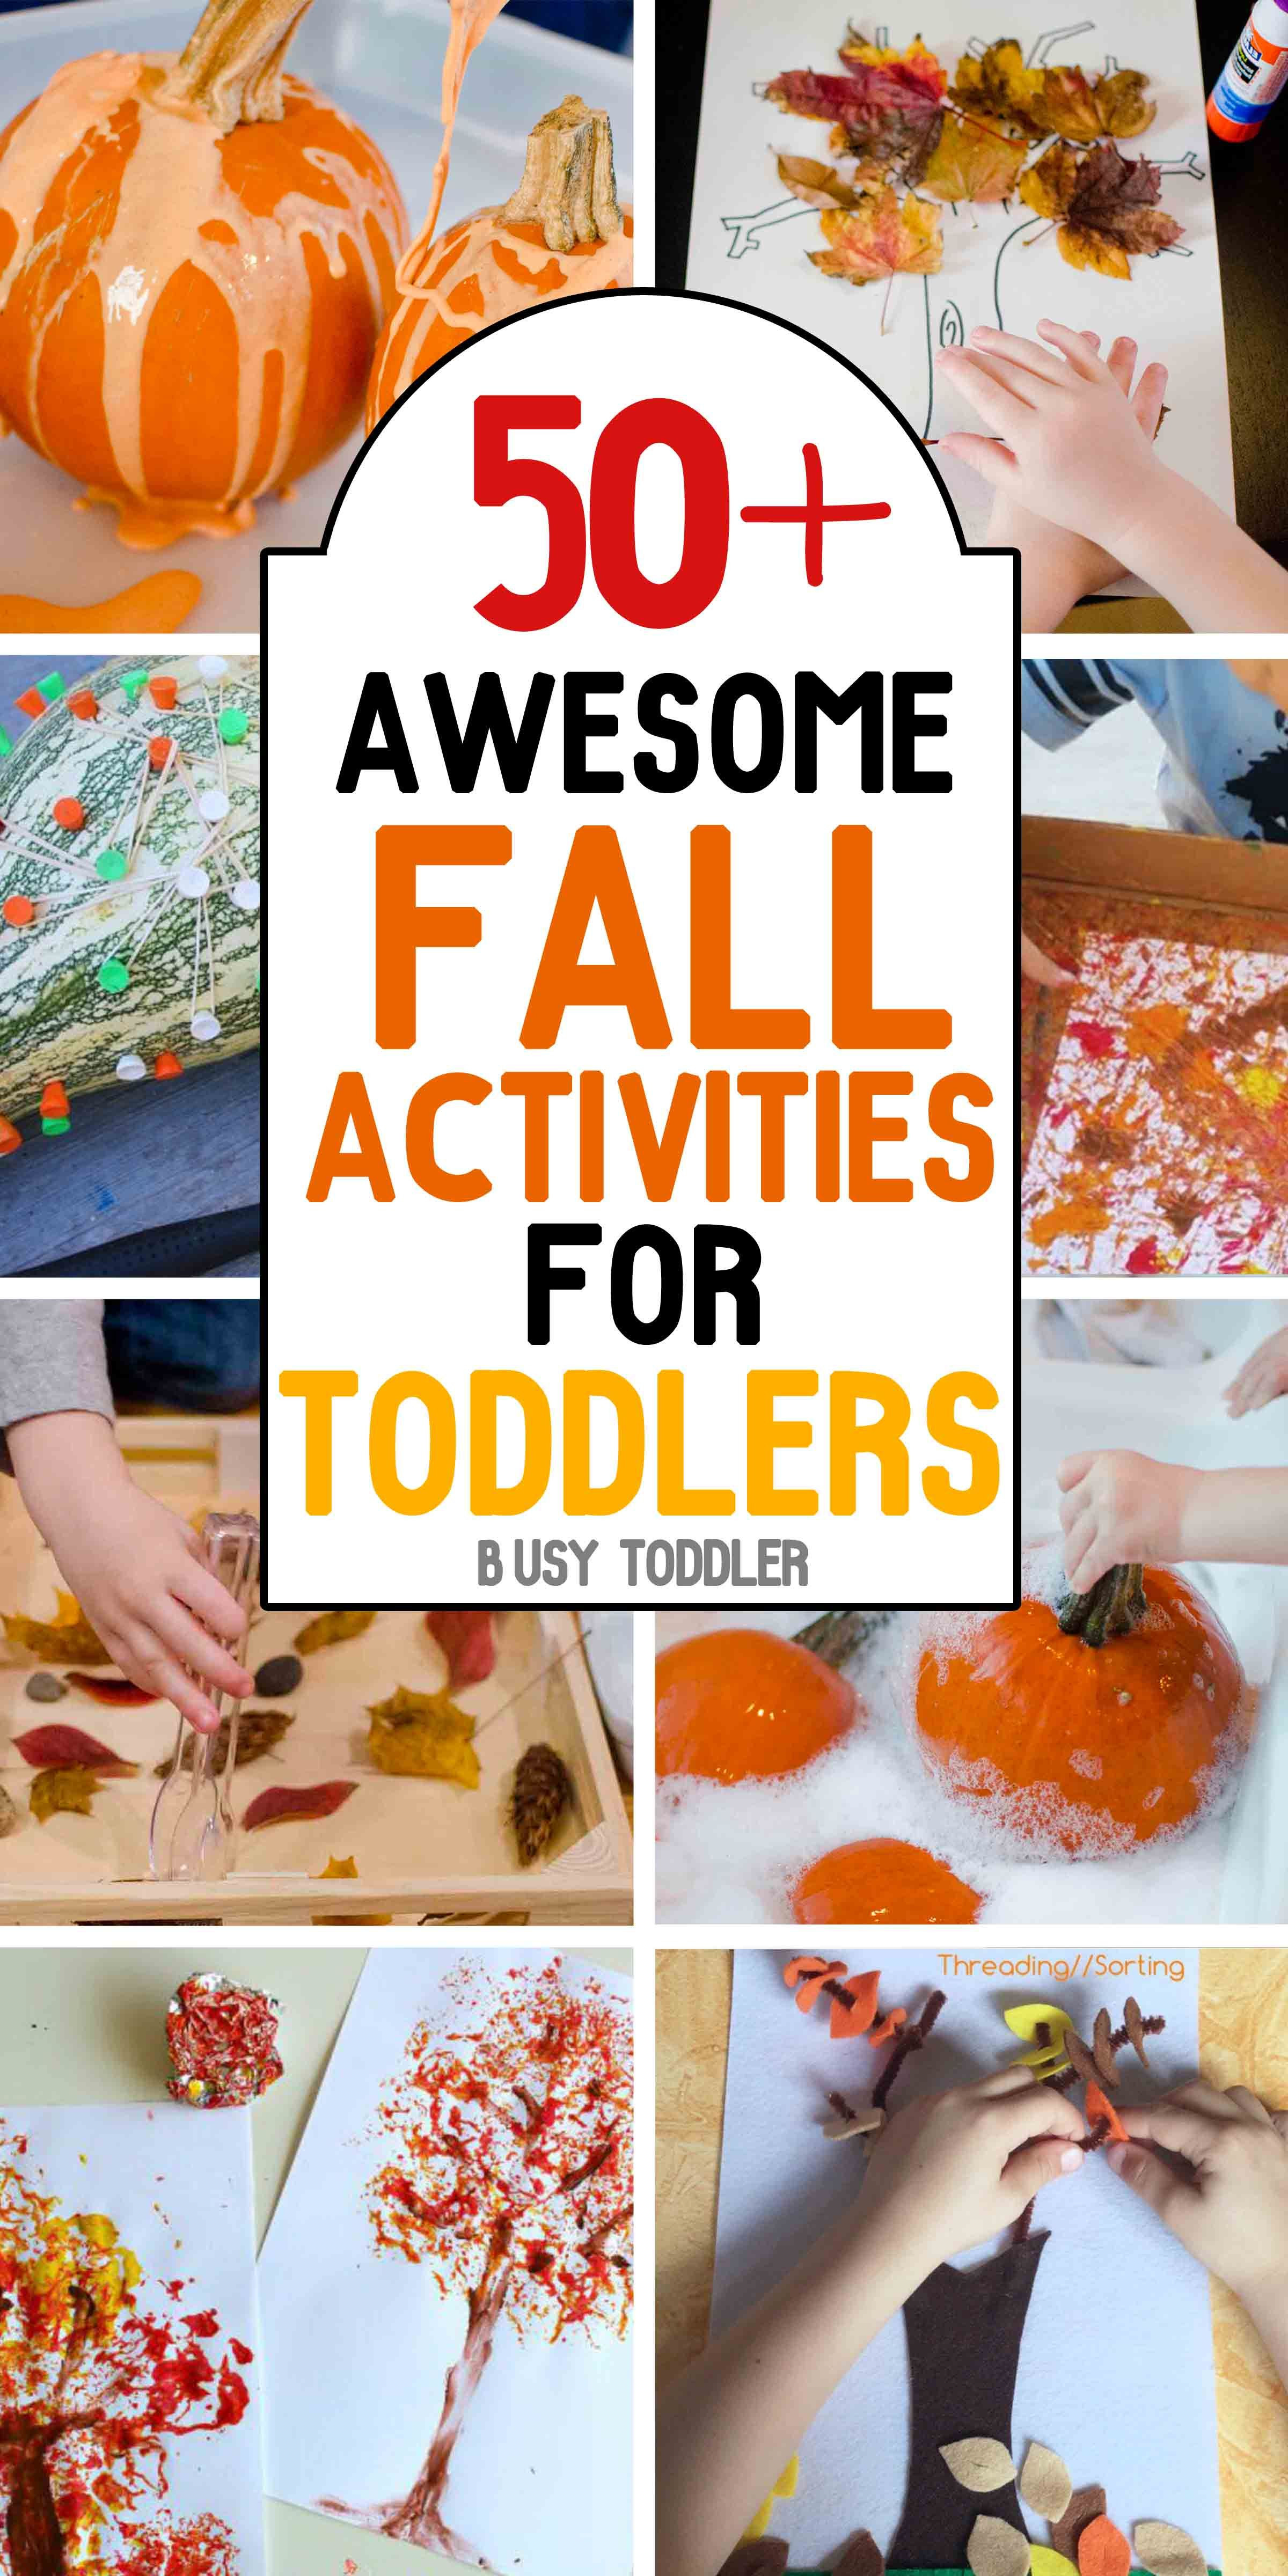 Toddler Fall Craft Ideas
 50 Awesome Fall Activities for Toddlers